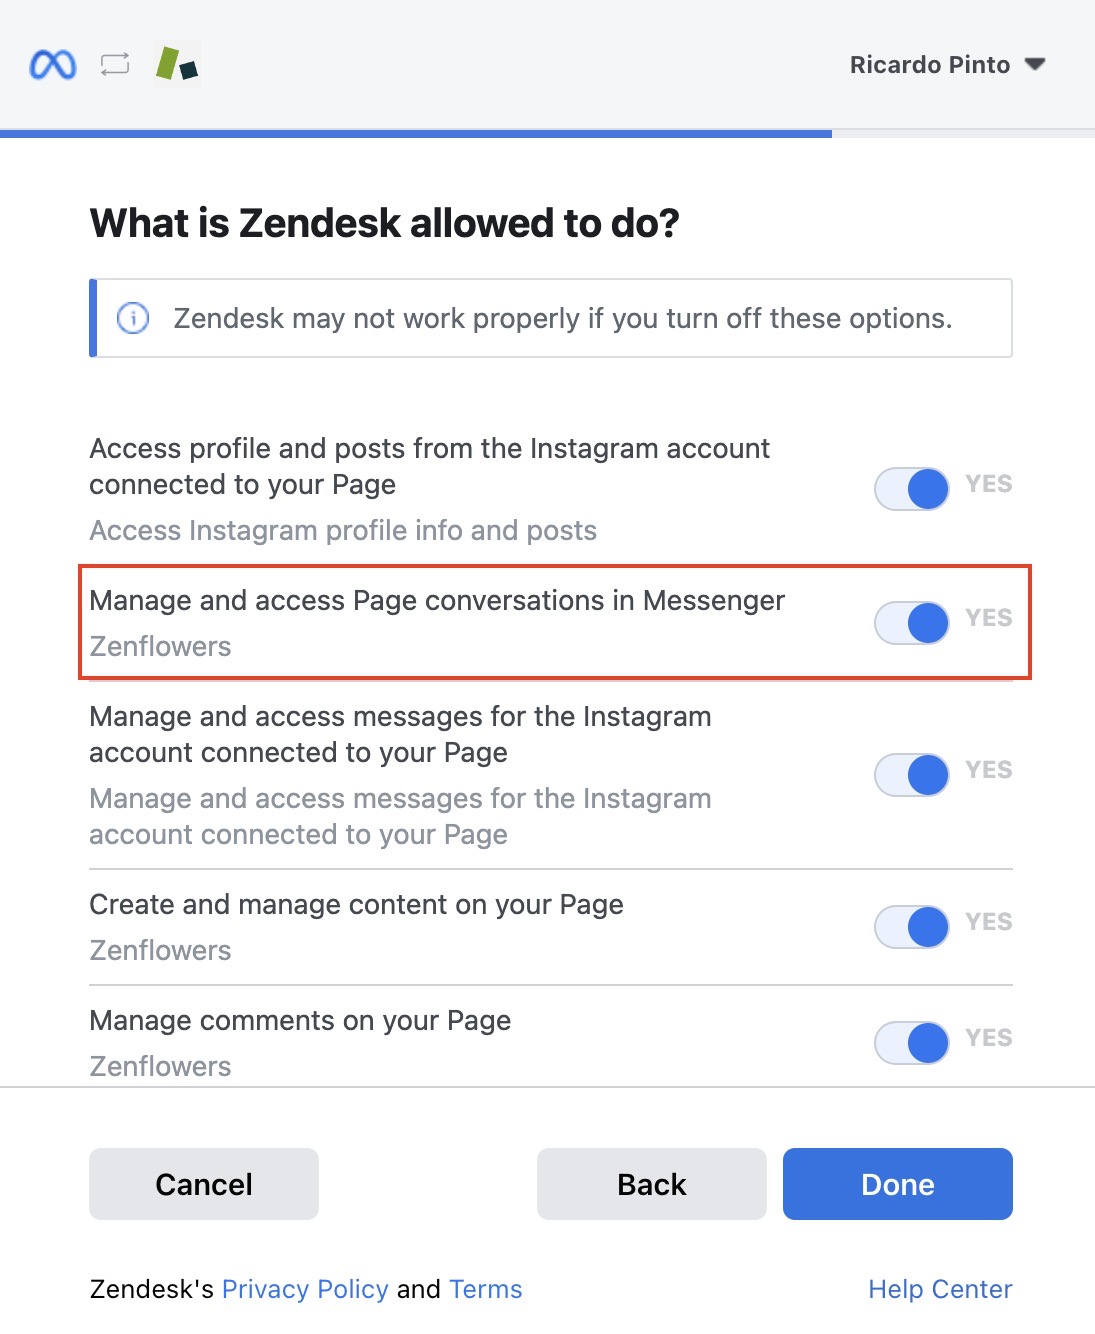 Manage and access Page conversations in Messenger